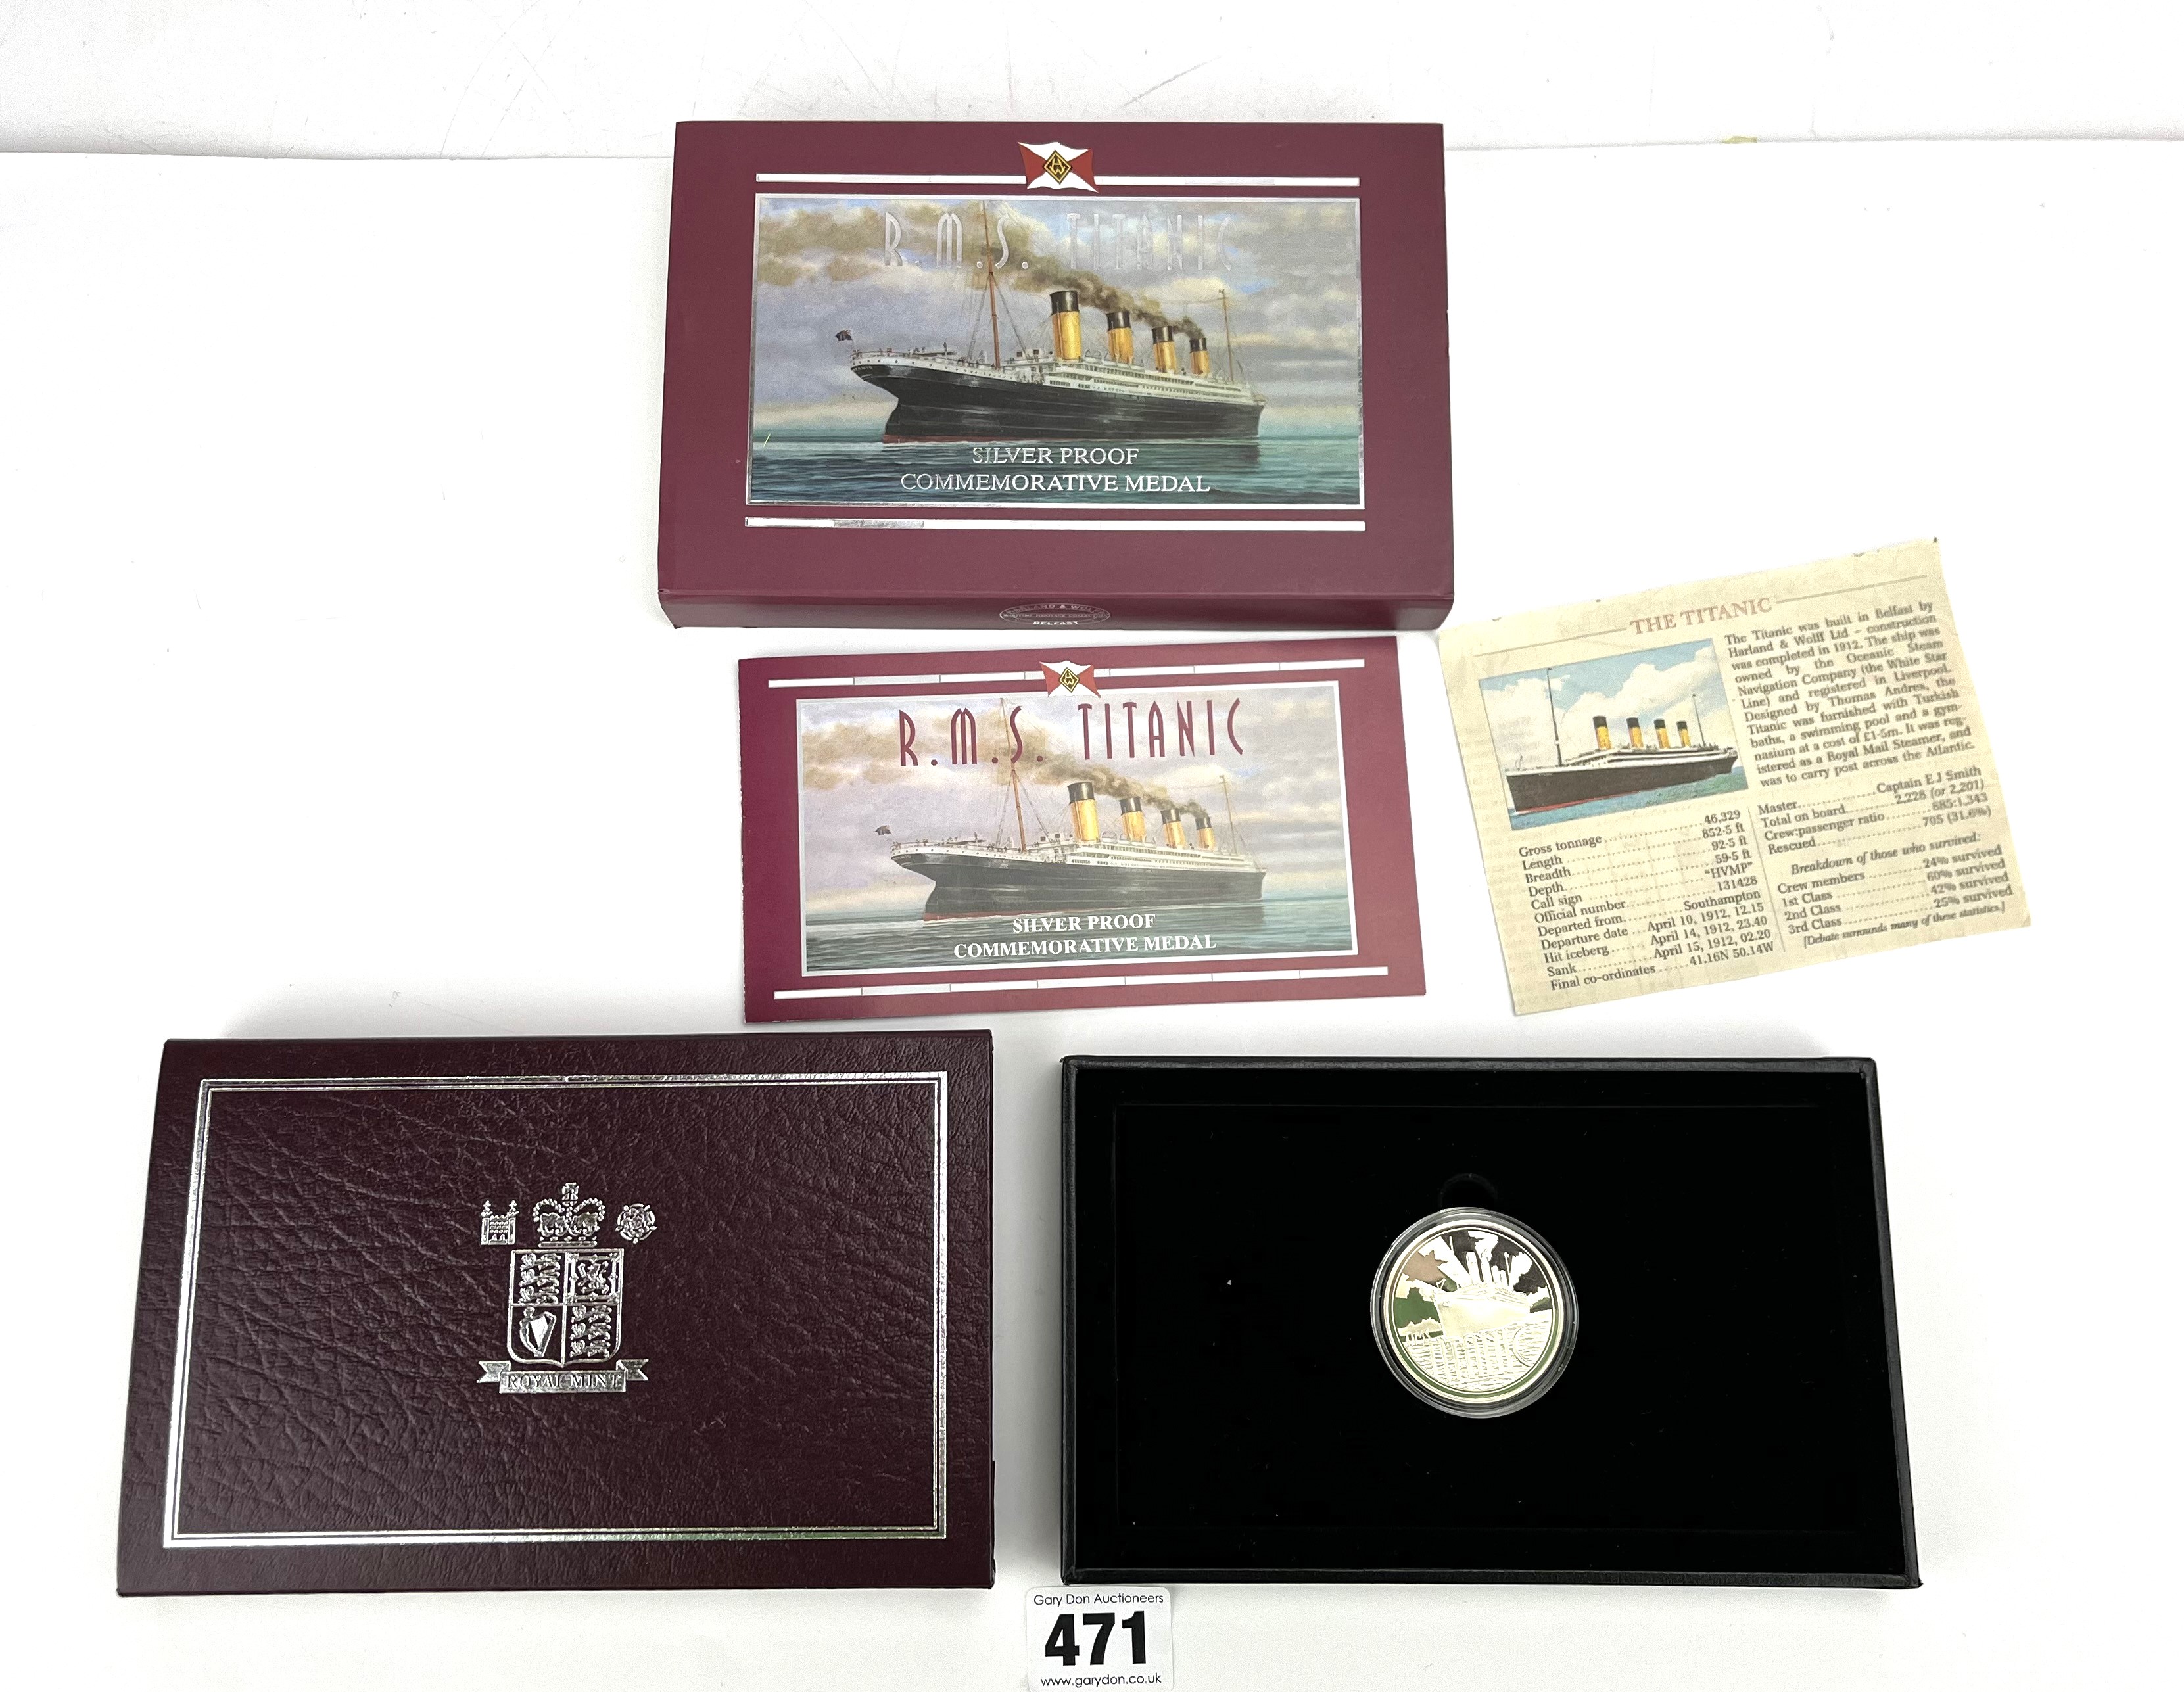 Titanic silver proof commemorative medal - Image 2 of 4